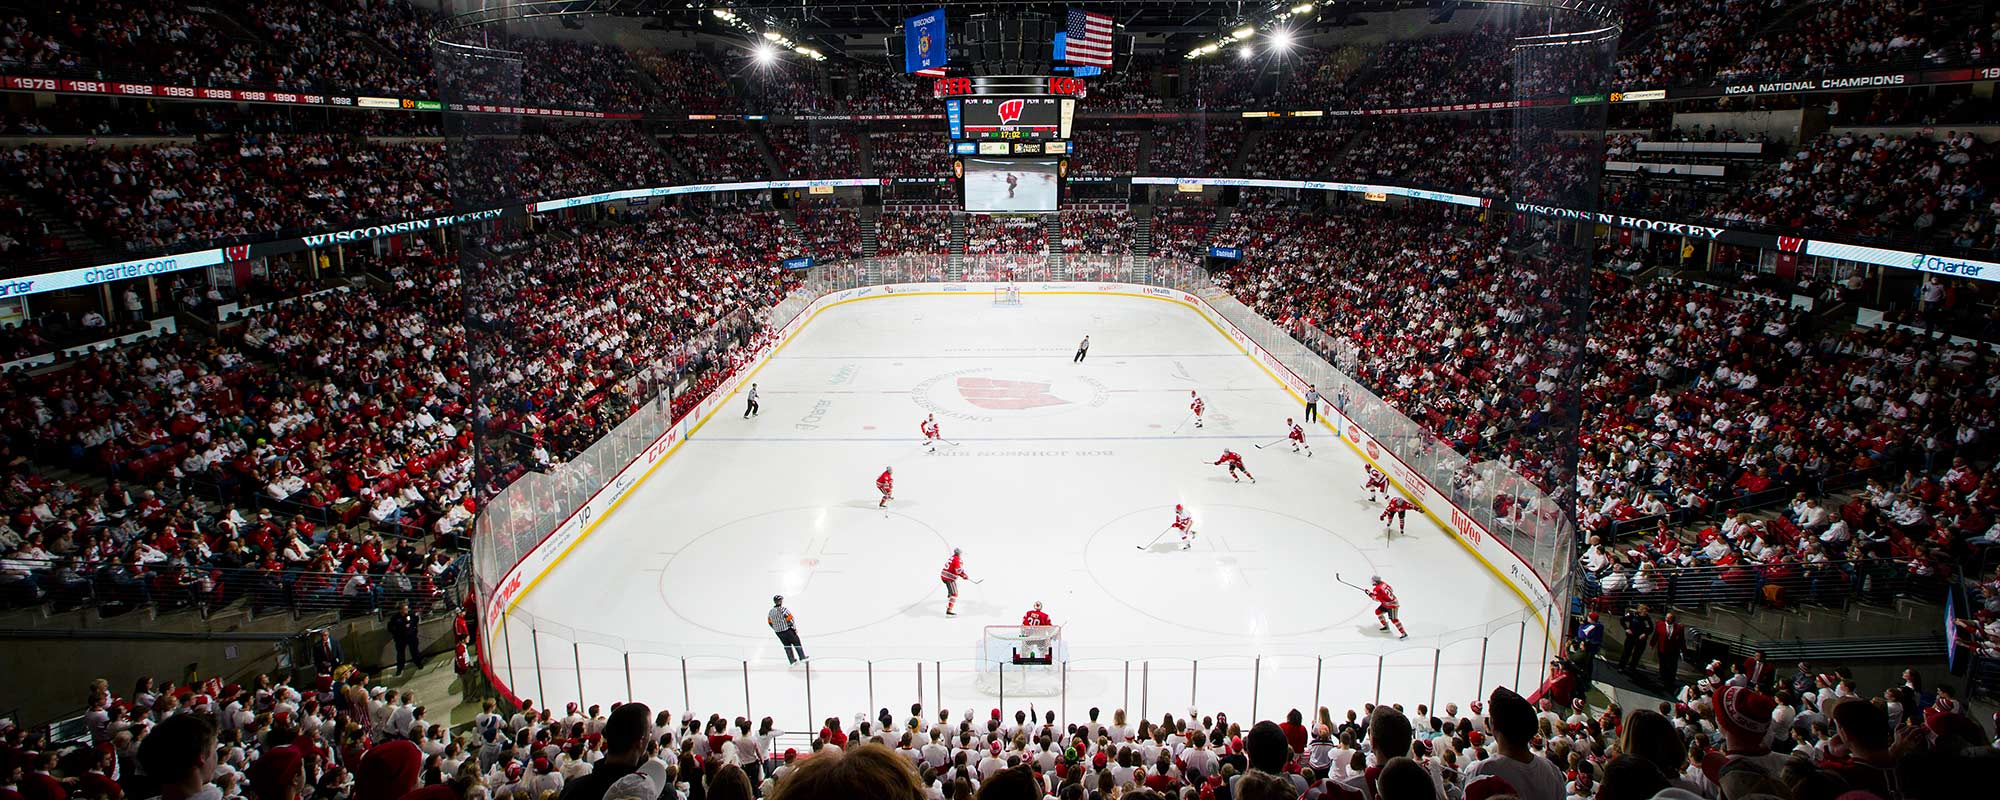 A photo of a Men's Hockey game at the Kohl Center